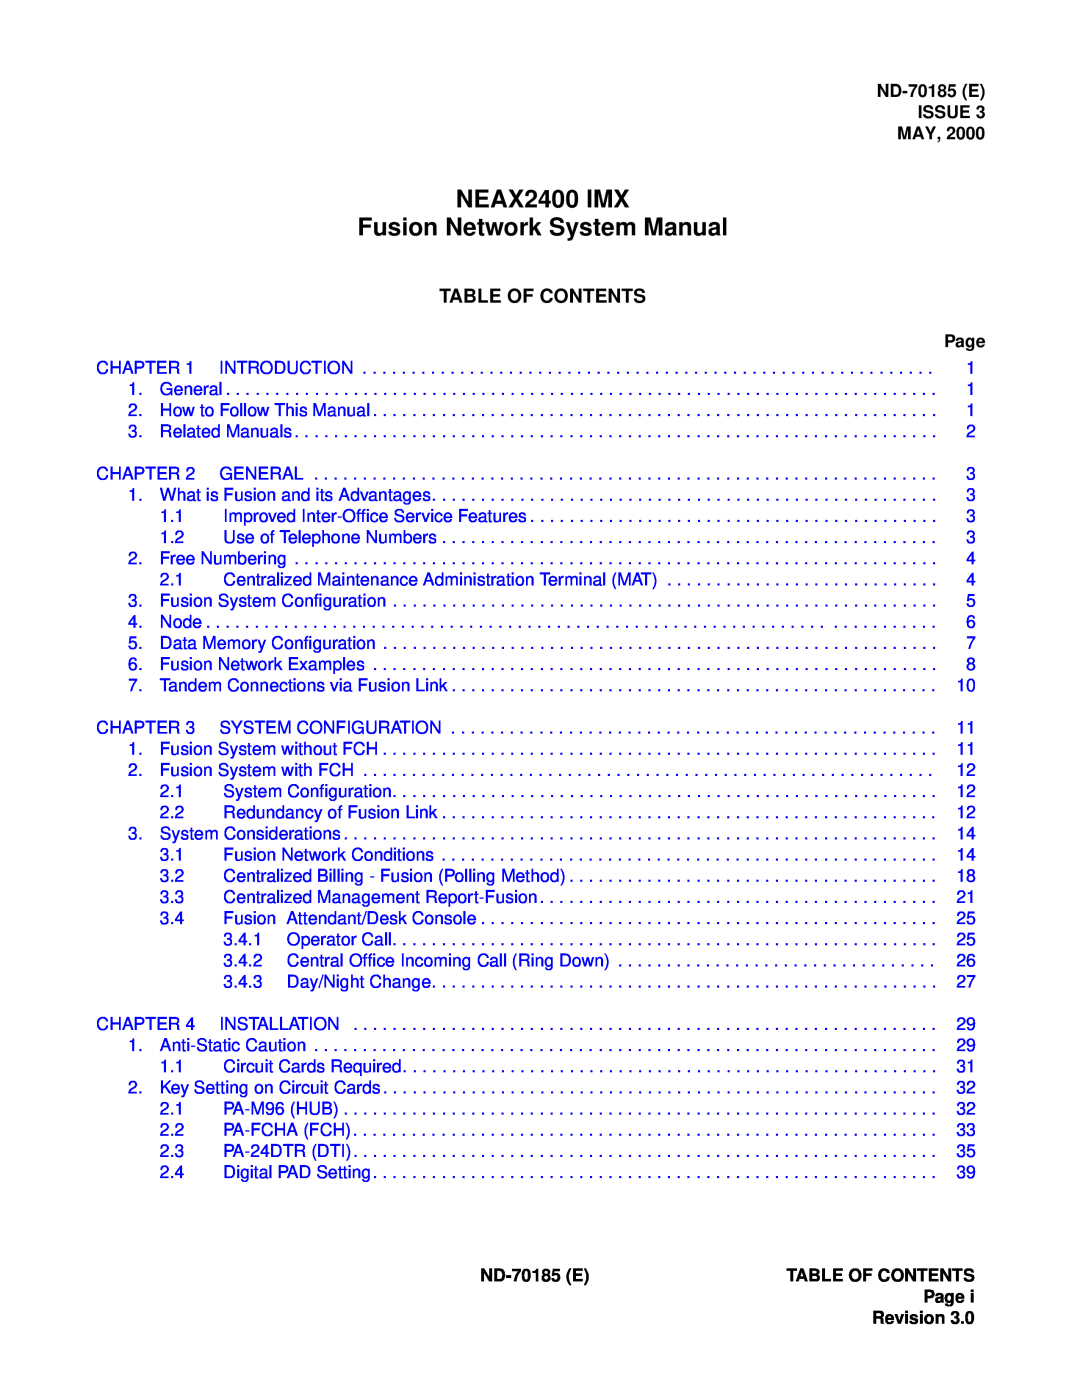 NEC system manual NEAX2400 IMX, Fusion Network System Manual, Table Of Contents, ND-70185E, Issue, May, Page 